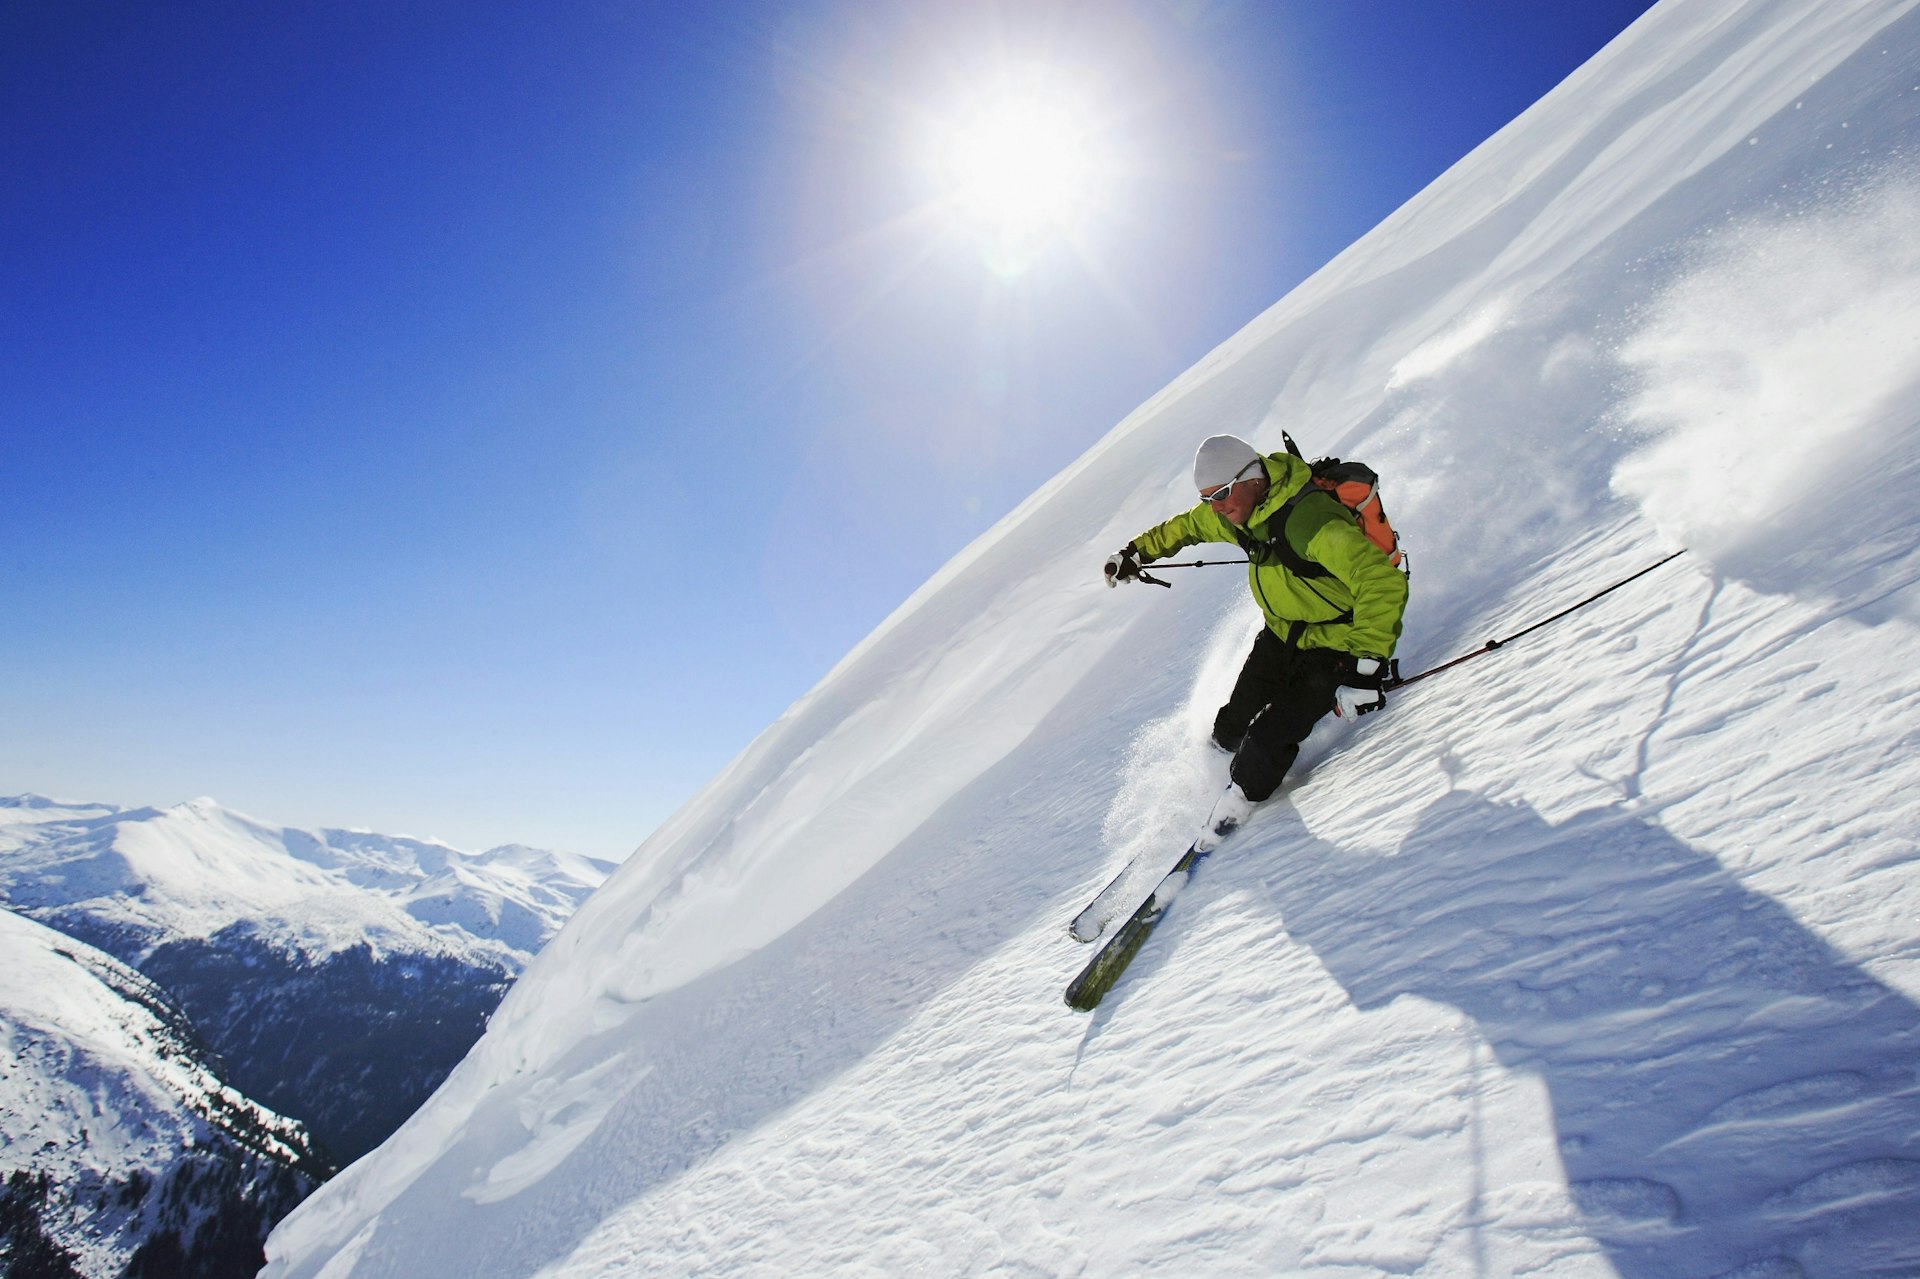 A skier makes a sharp turn on a steep slope of virgin snow; the slope cuts away to a beautiful backdrop of distant mountains.